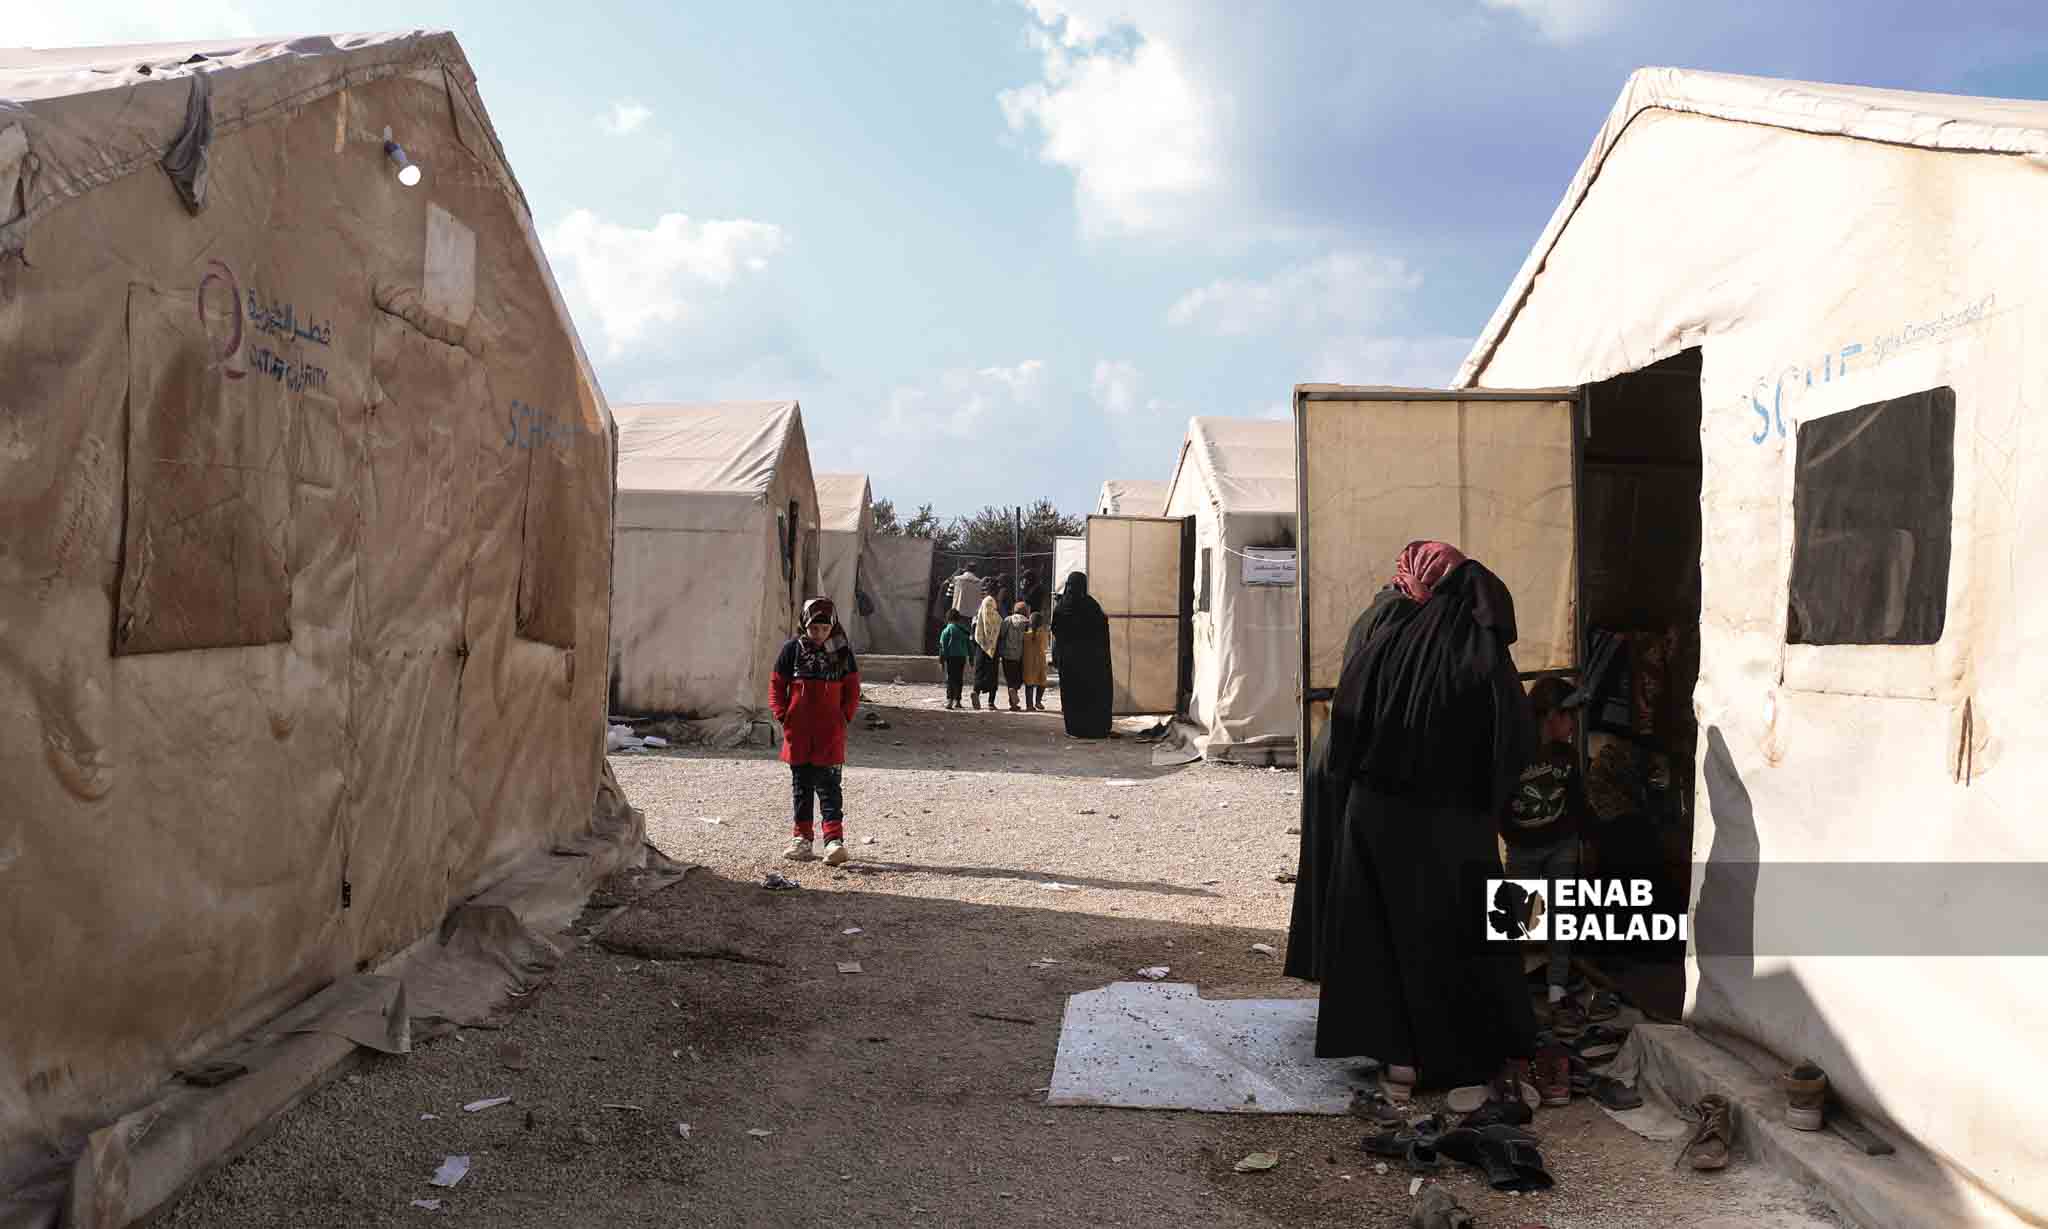 Quake-affected civilians in shelter camps in the village of al-Hamzia in the Salqin countryside, northwestern Syria - February 15, 2023 (Enab Baladi/Mohammad Nasan Dabel)